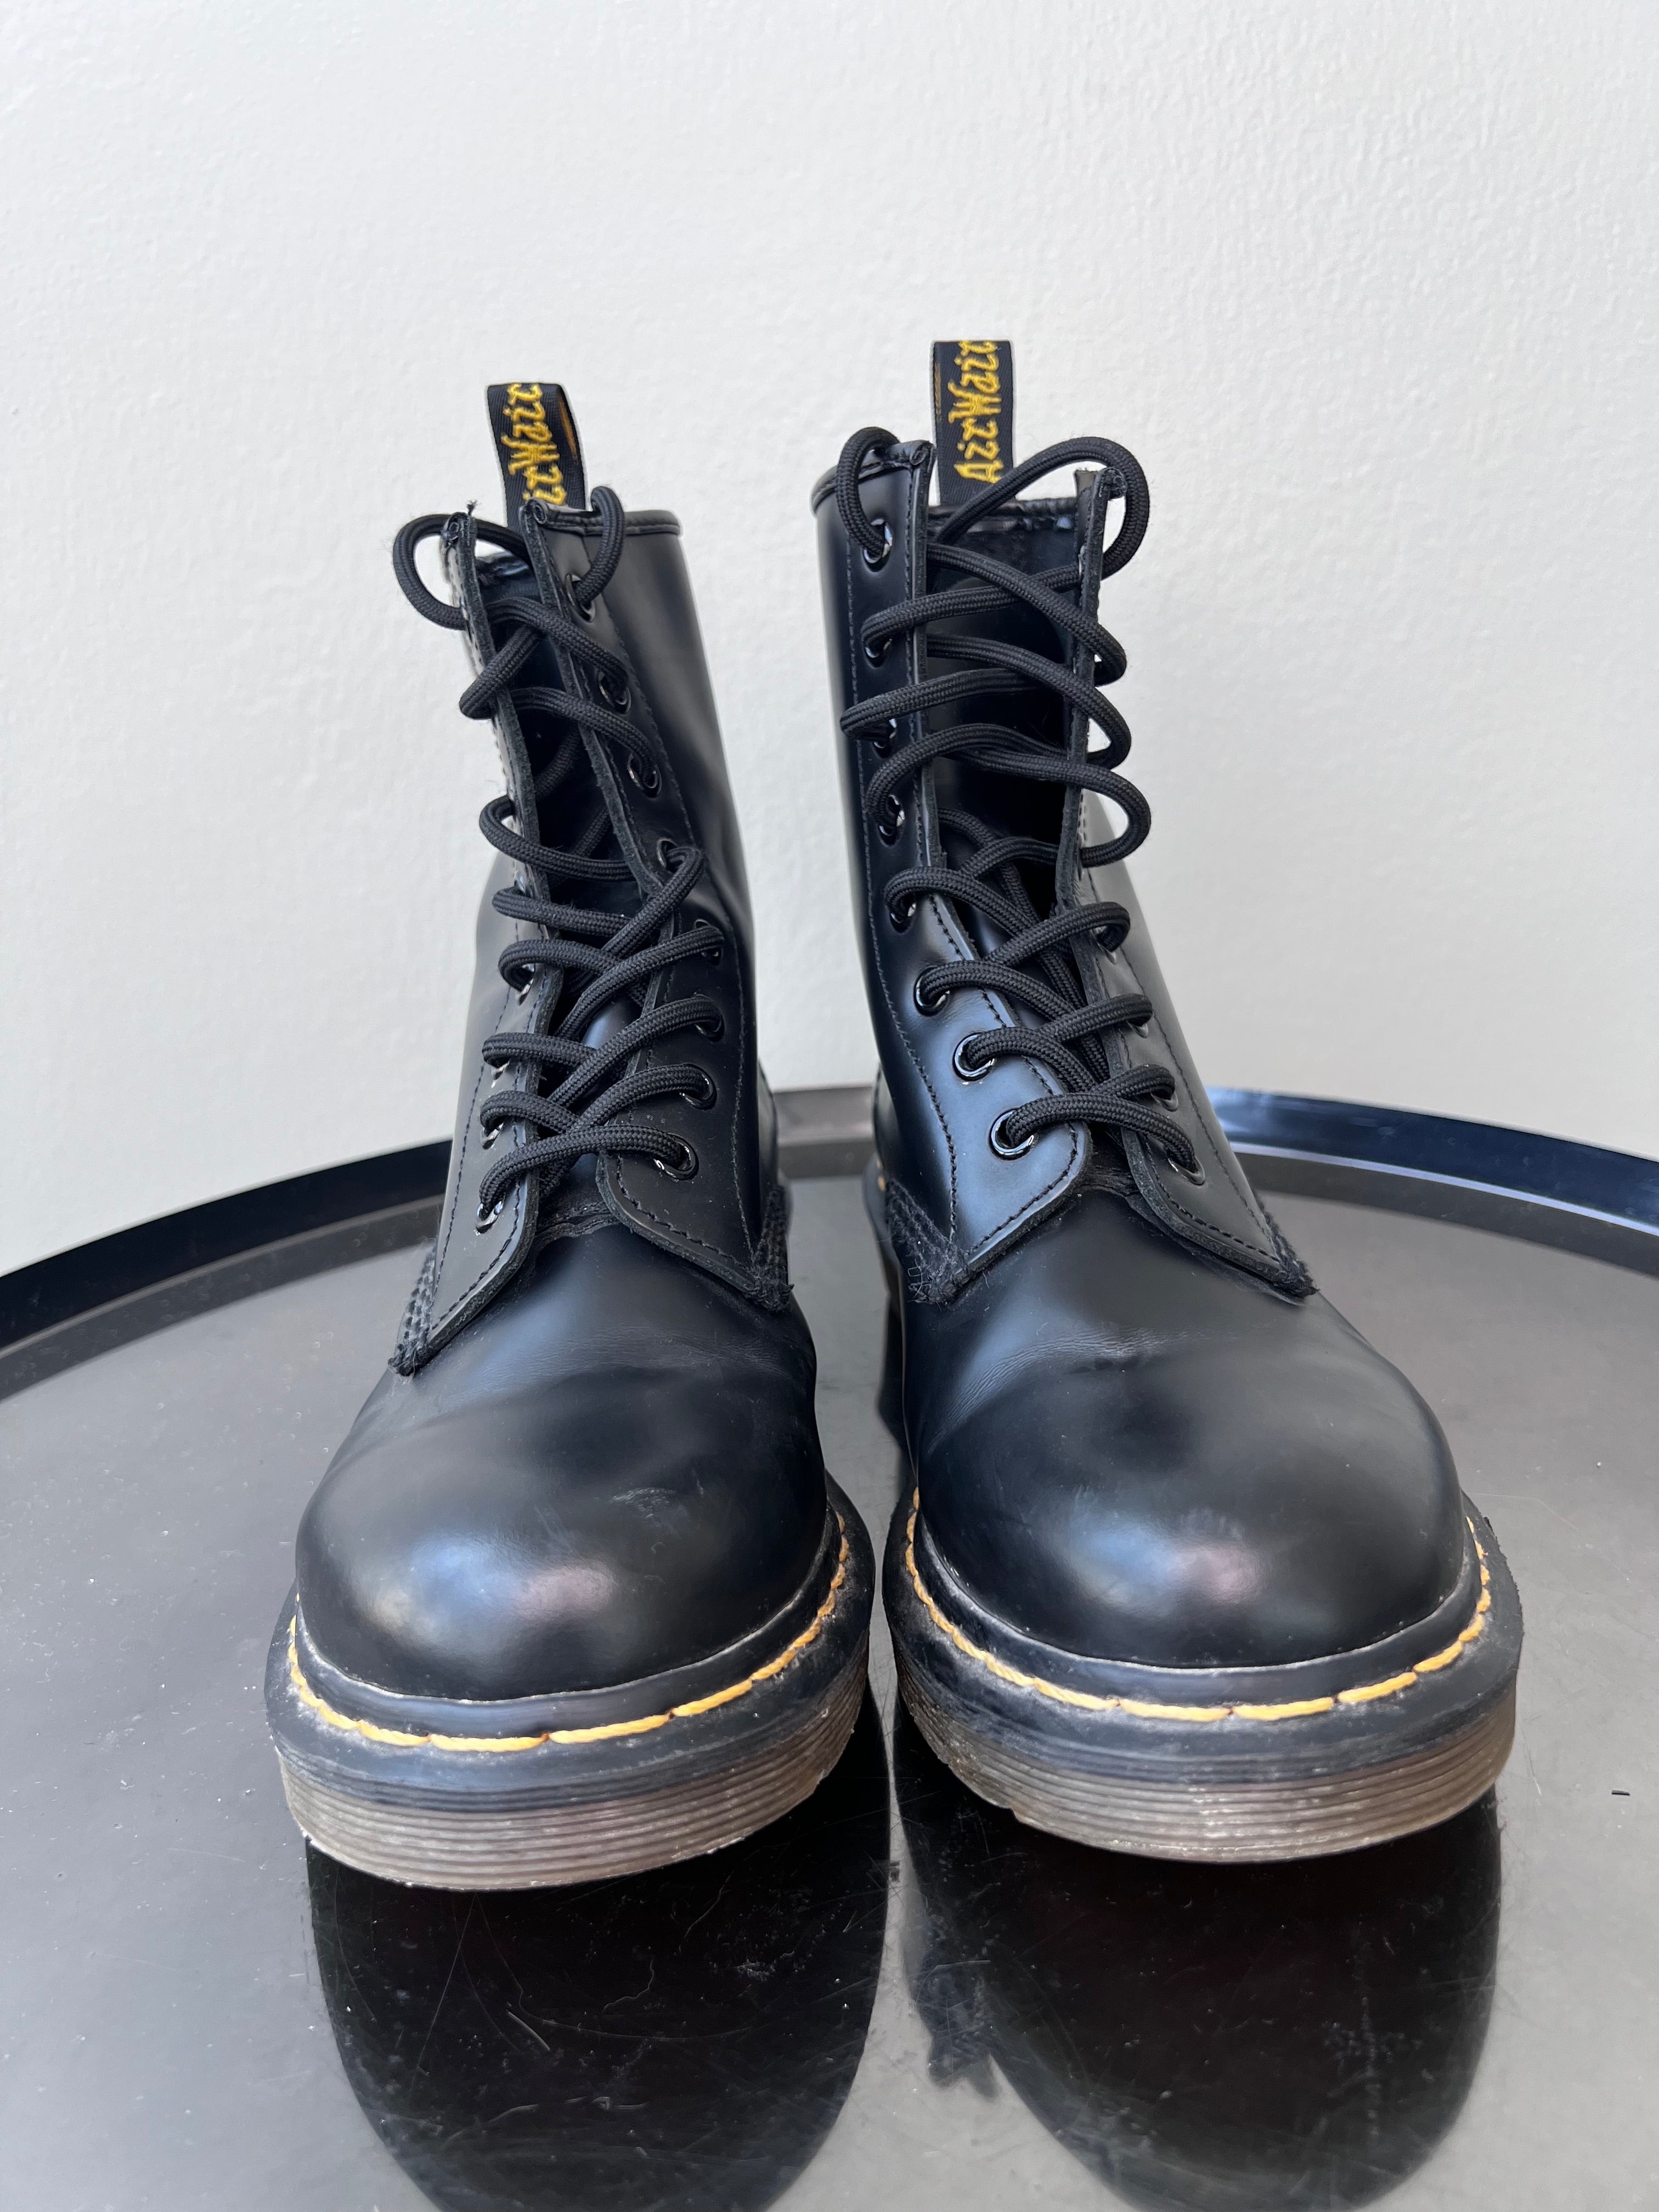 Black boots with yellow stitching- DOCMARTENS